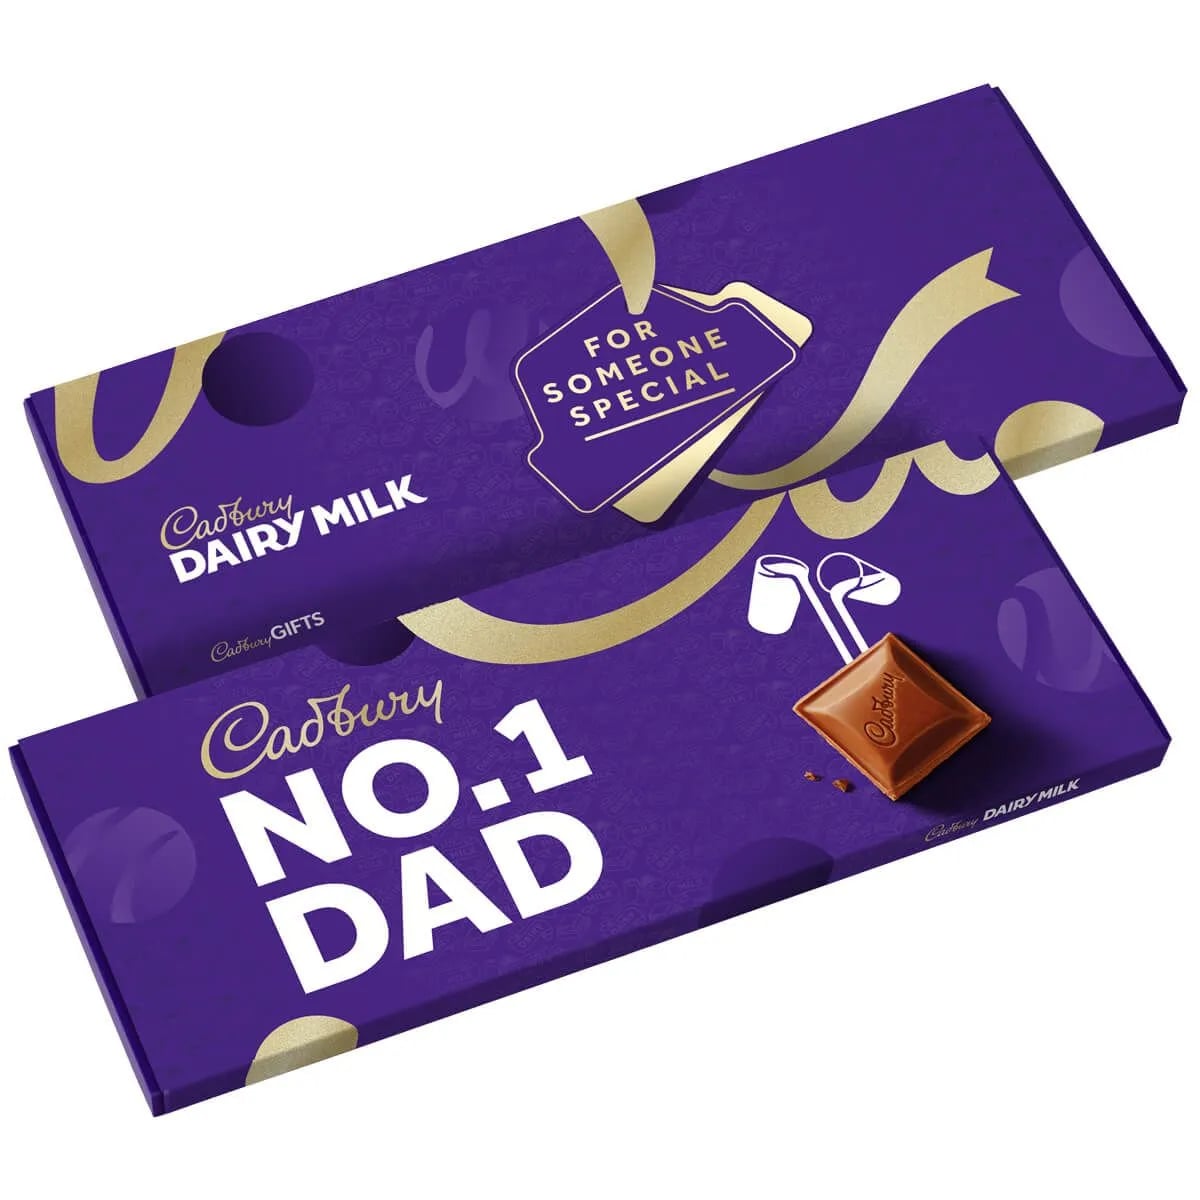 10 of the best affordable gifts for dads of all ages | The Independent